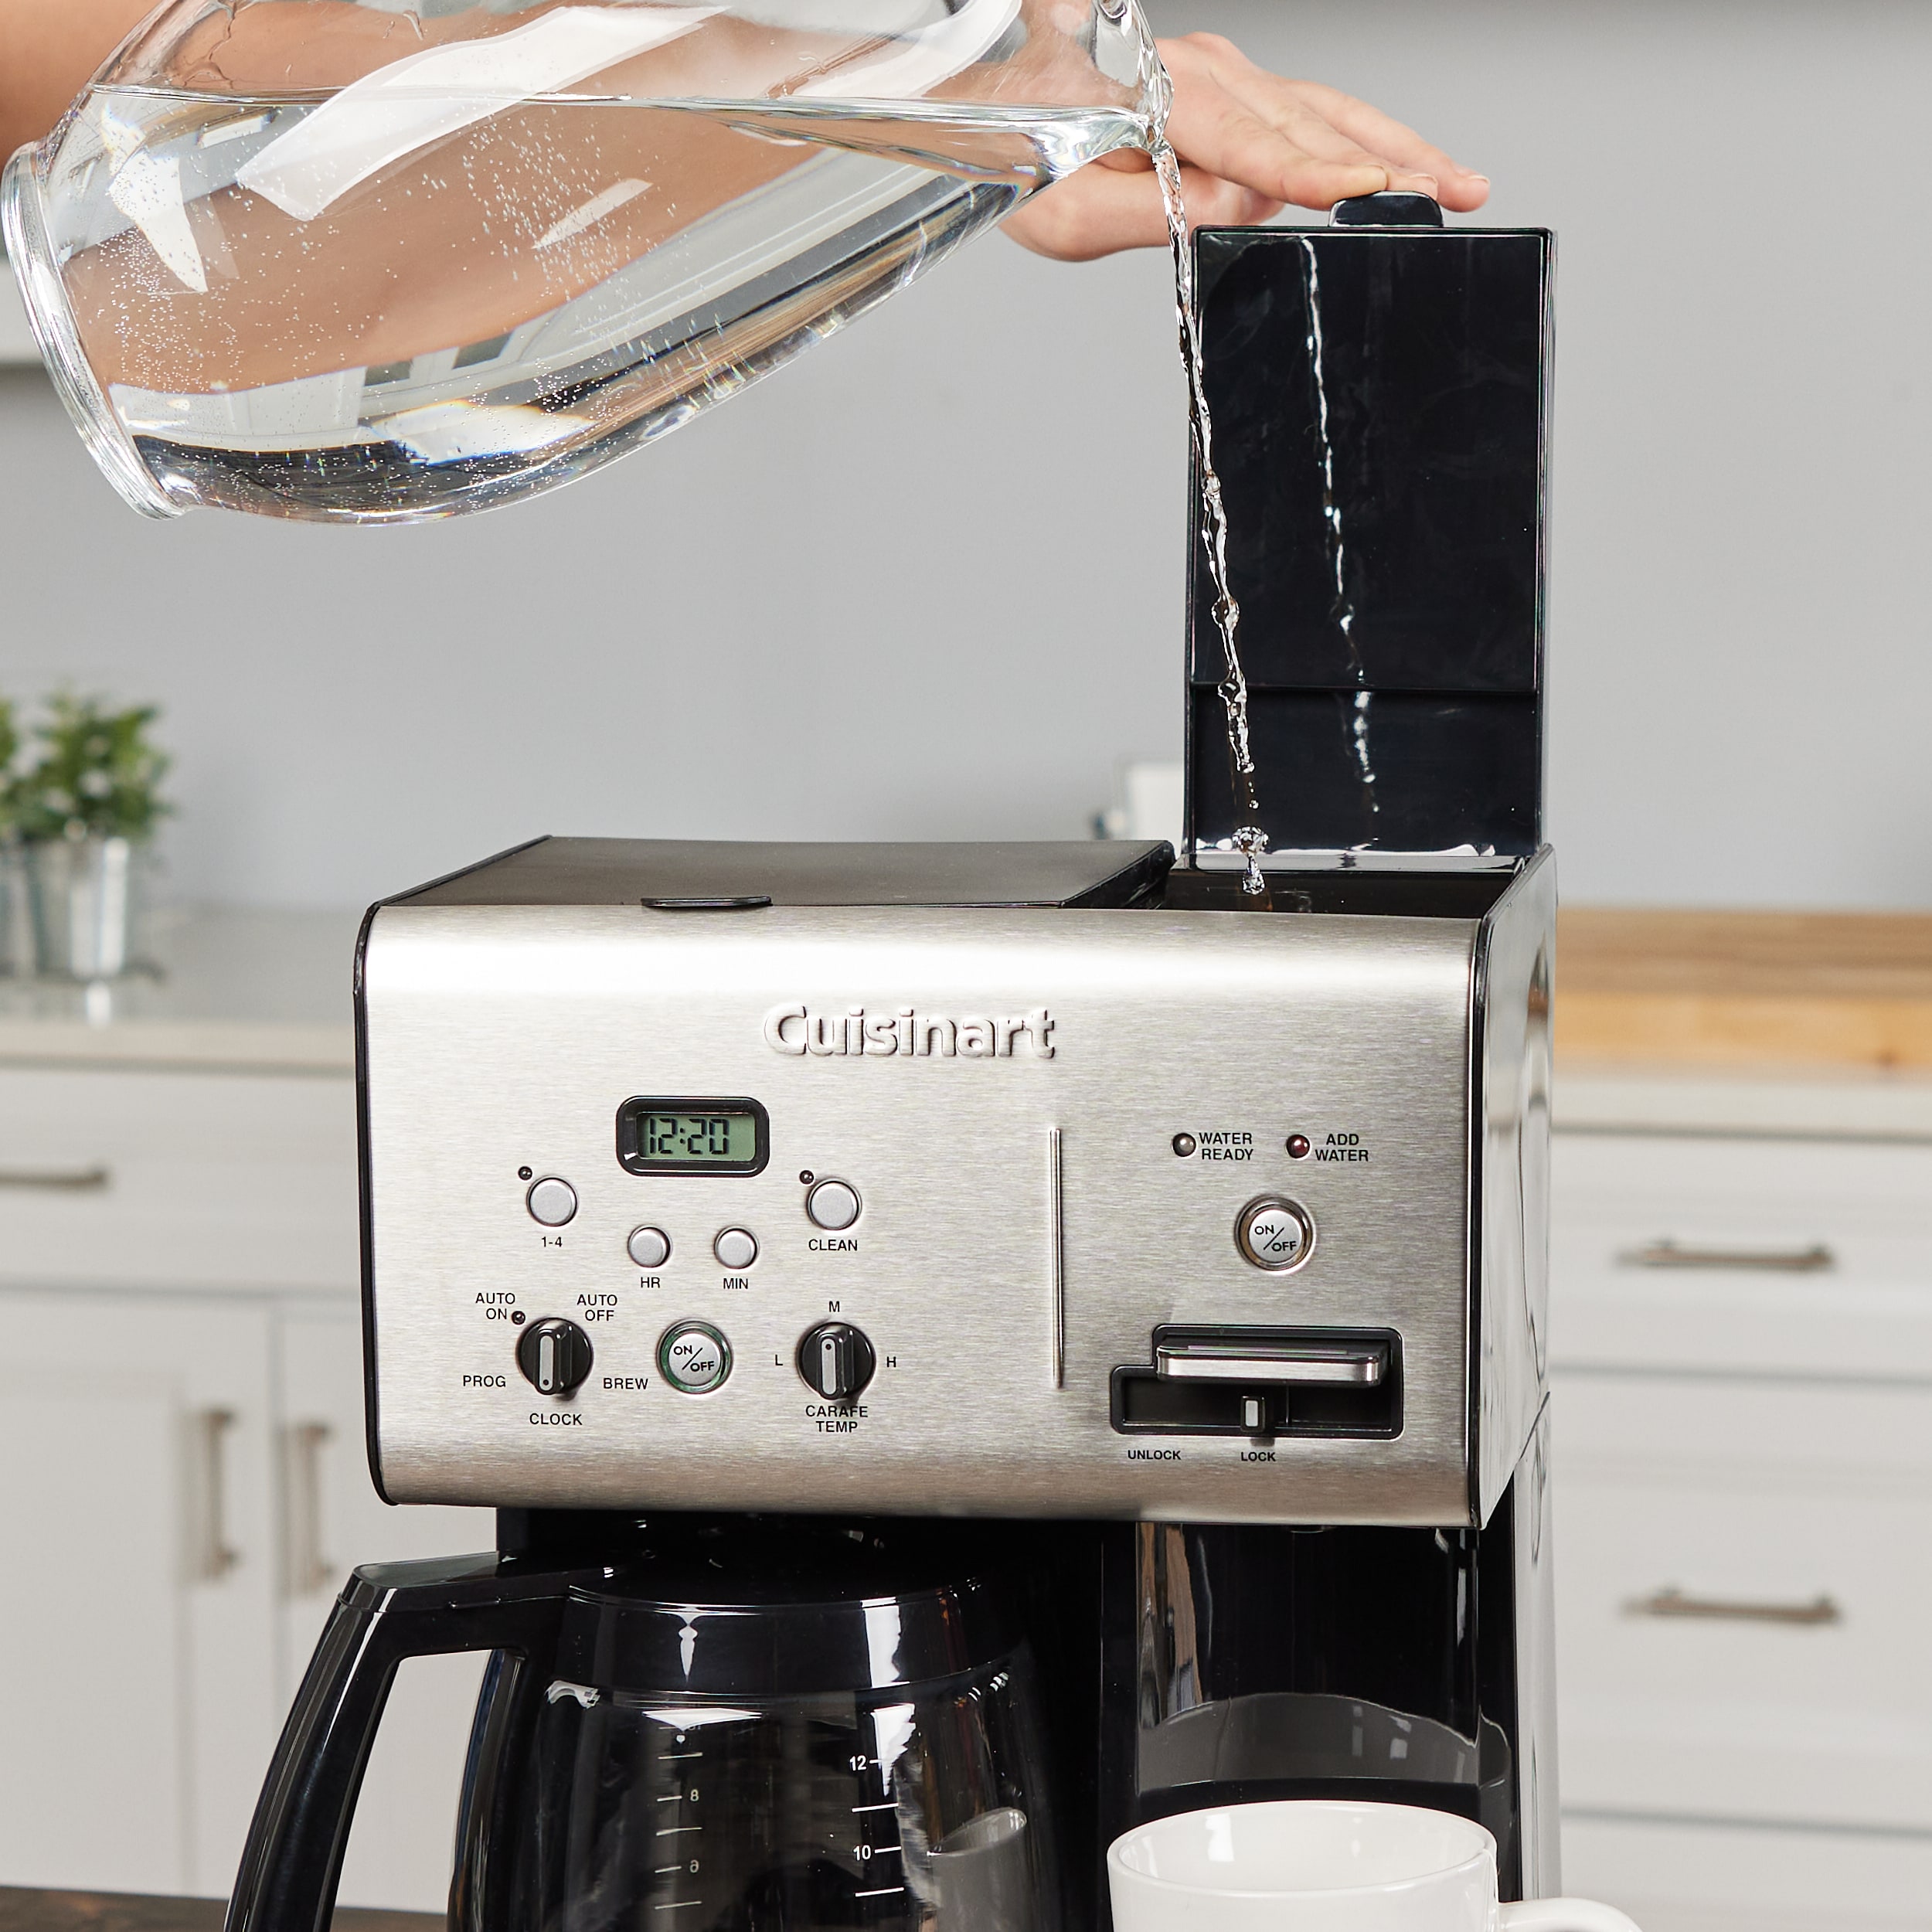 Cuisinart 12-Cup Black with Automatic Shut-Off Drip Coffee Maker CHW-12P1 -  The Home Depot